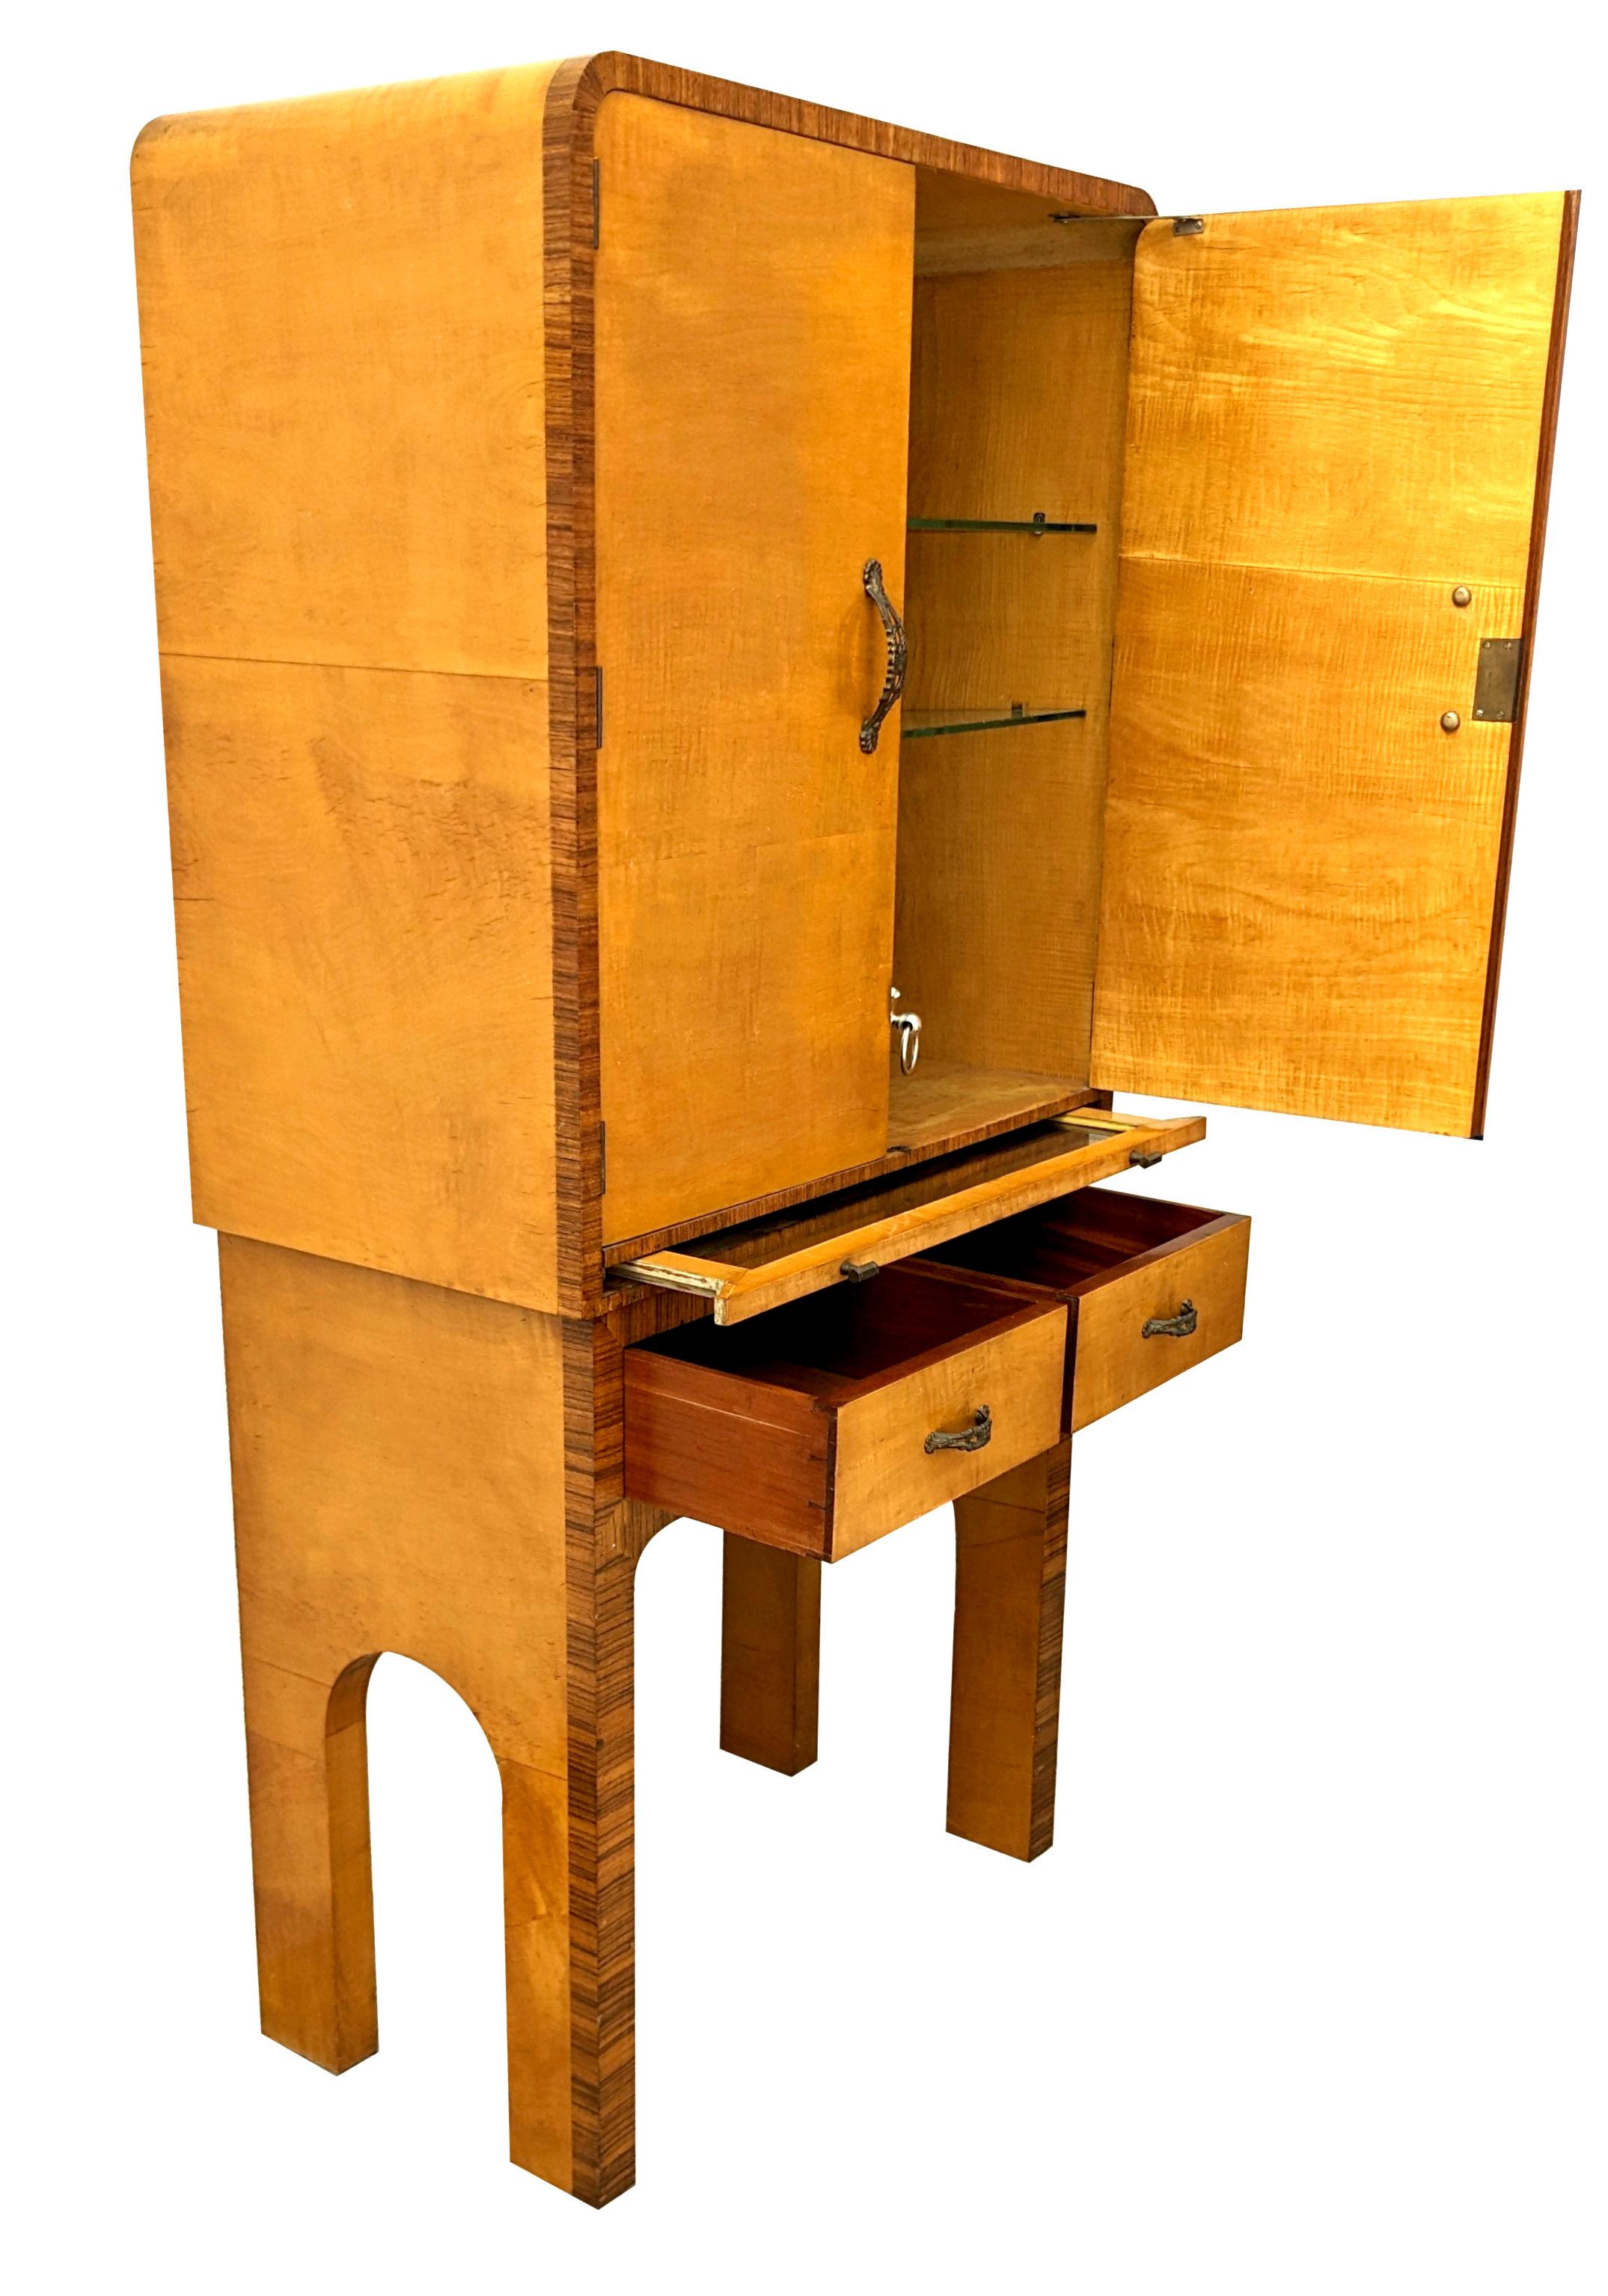 20th Century Art Deco Satinwood High End Cocktail Cabinet By Epstein Brothers, c1930 For Sale